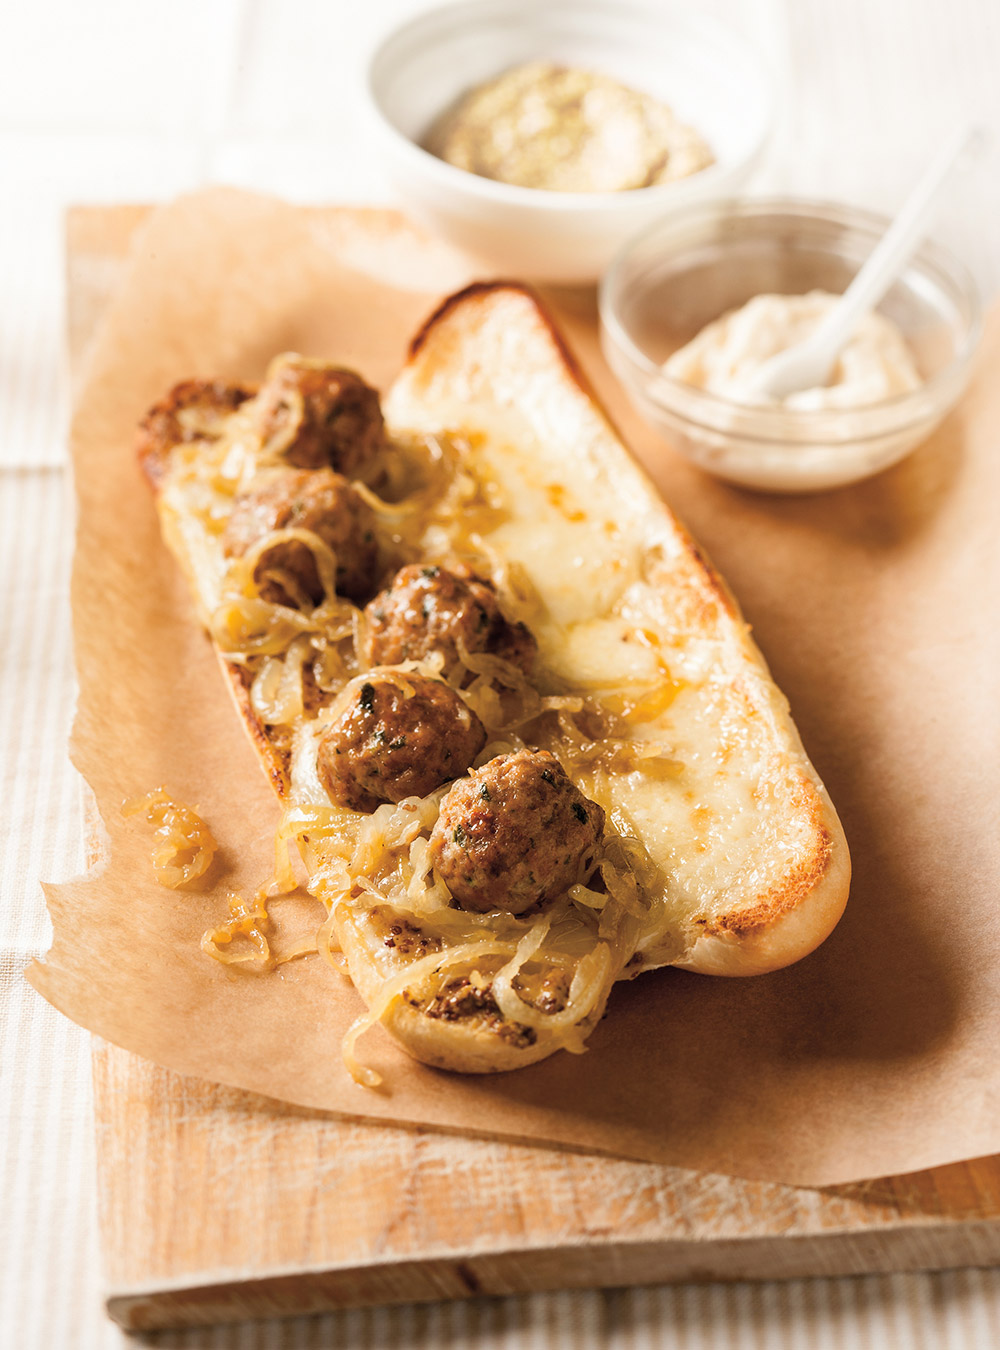 Meatball and Onion Subs